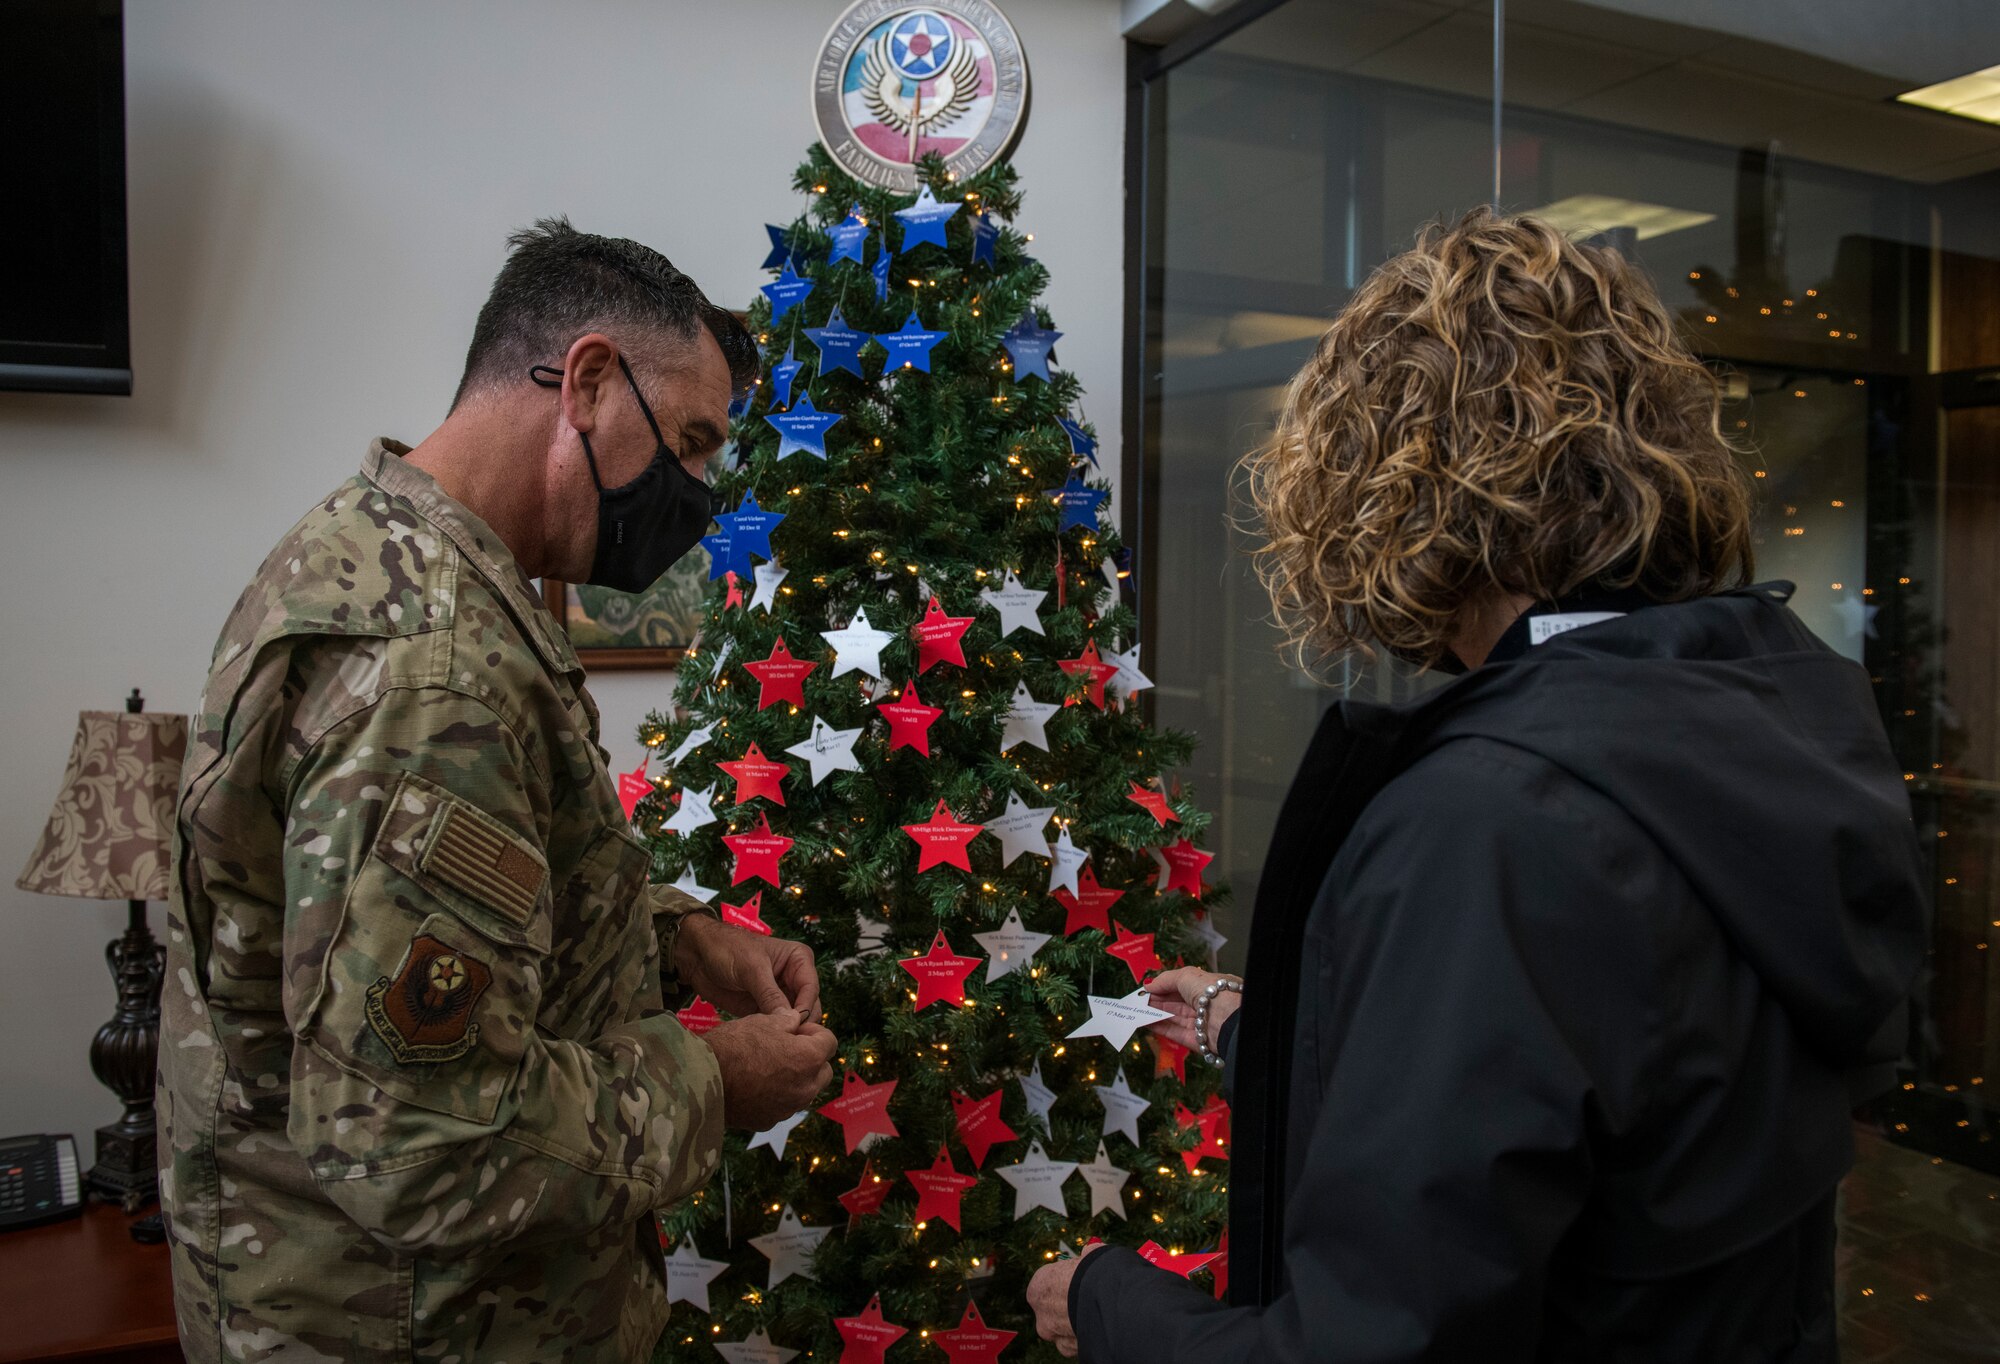 U.S. Air Force Maj. Gen. Eric Hill, deputy commander of Air Force Special Operations Command, places stars on an Honor Tree.